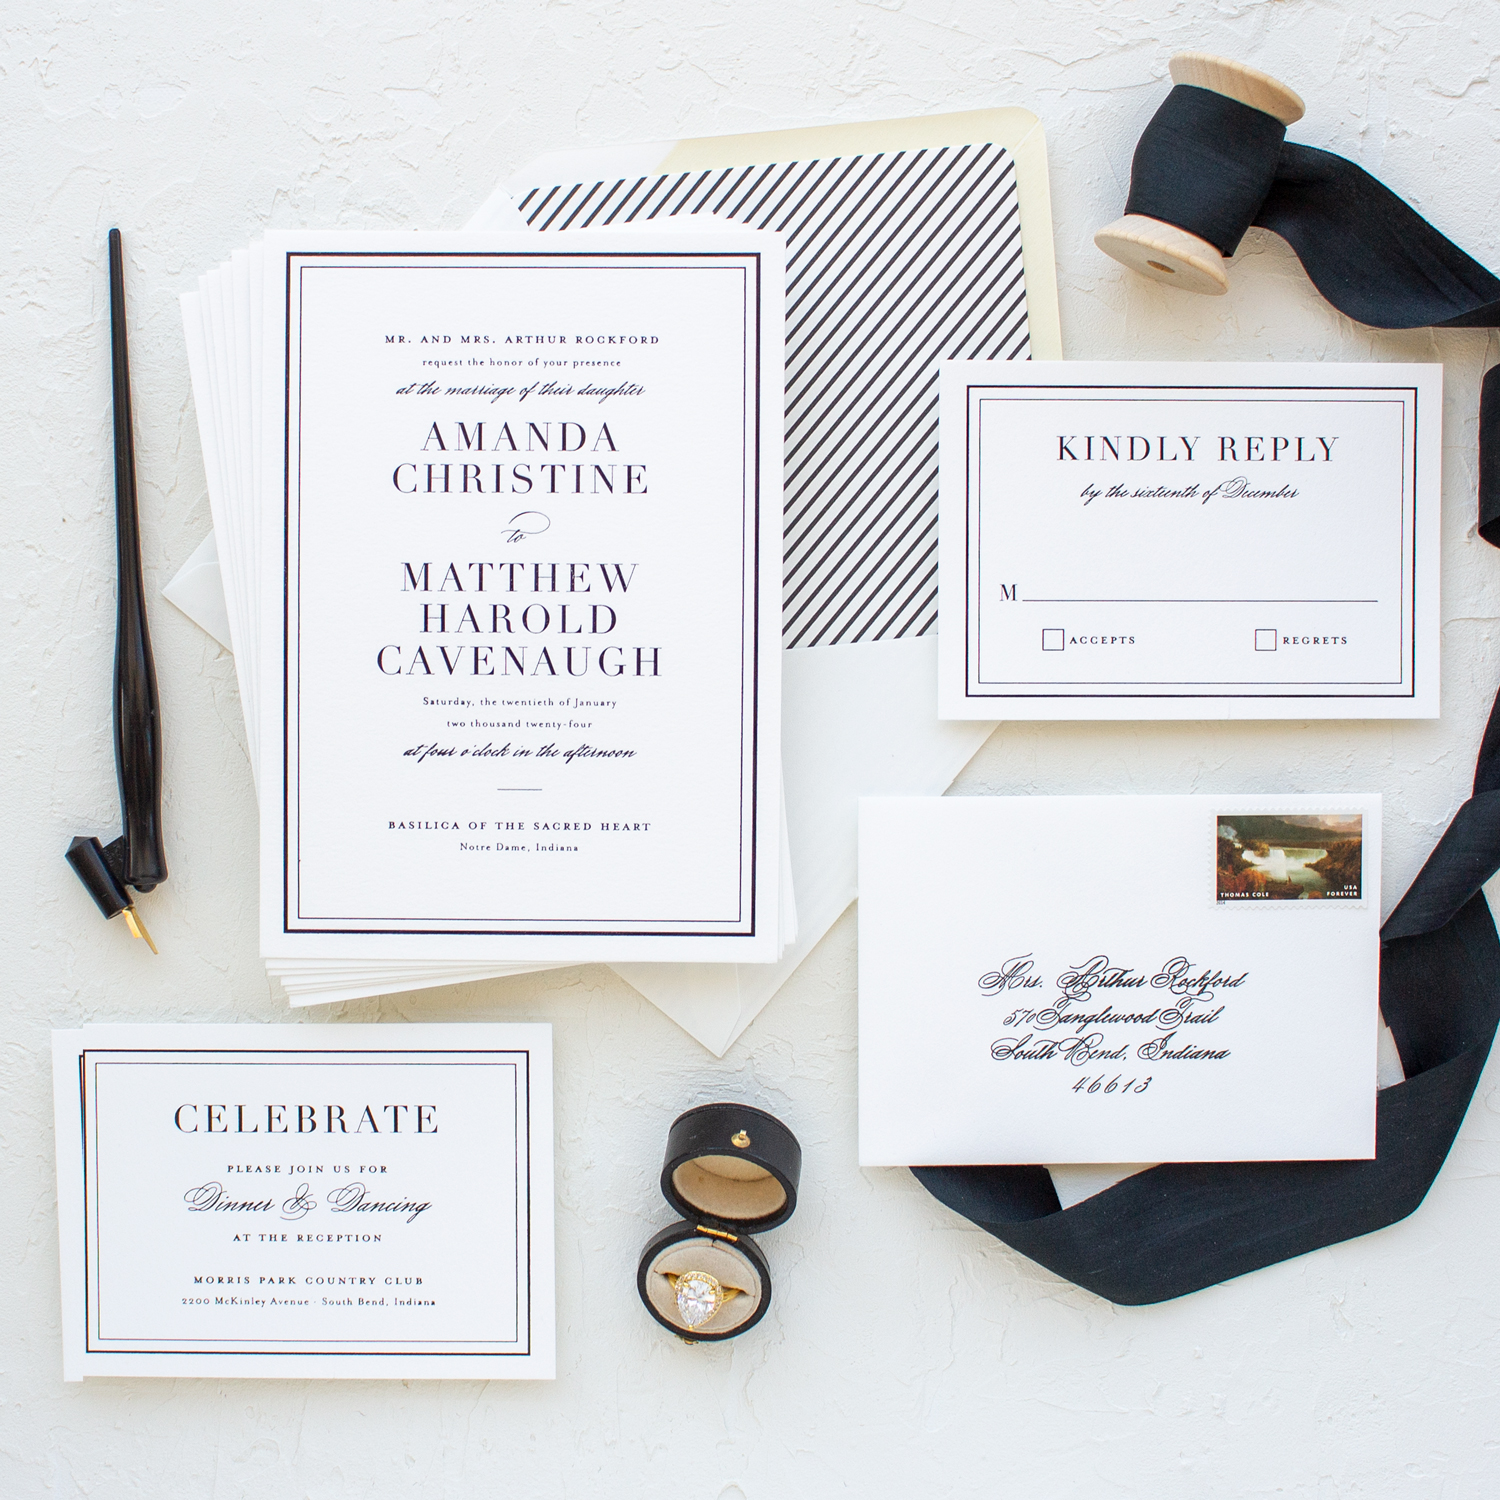 Classic Wedding Invitations for Notre Dame Brides SAMPLE Classic Border Black Foil Stamp Invitations for Formal Weddings